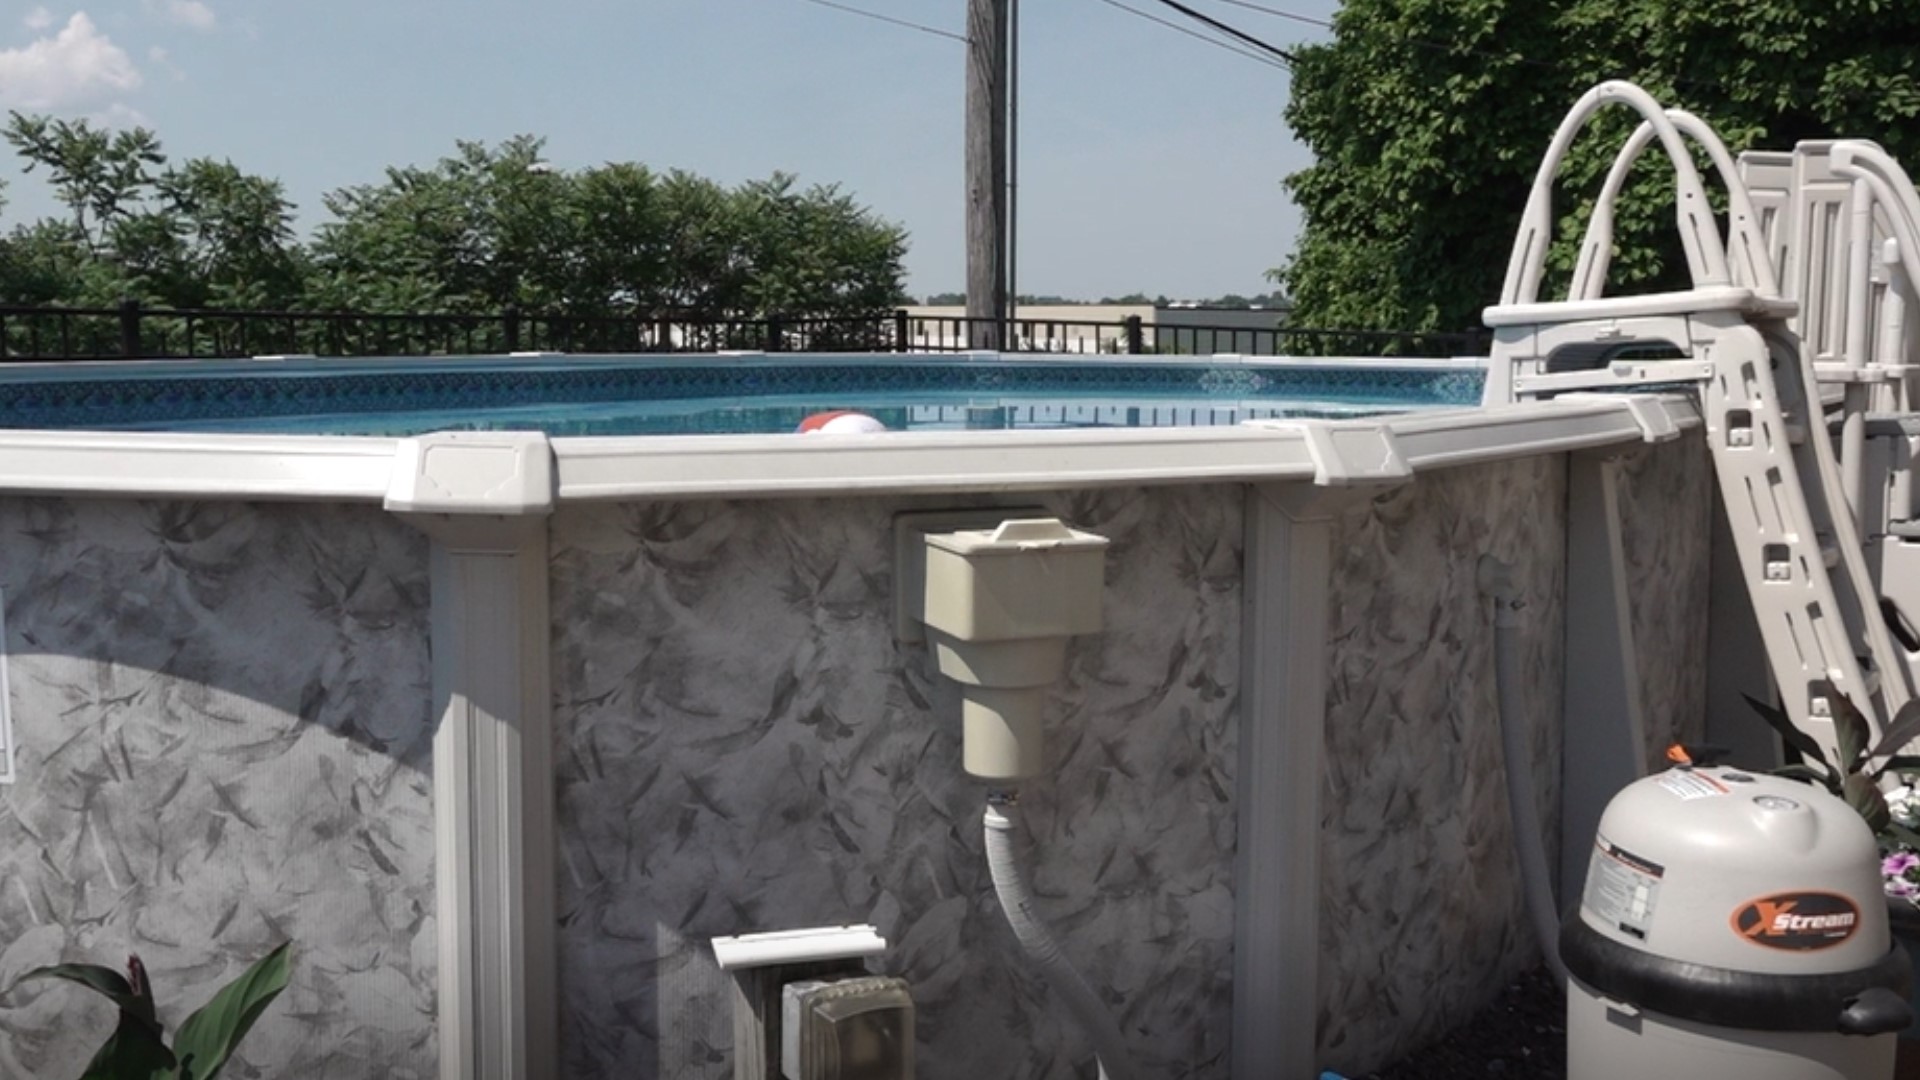 Local store owners say the cost of a pool has gone up 10 to 20 percent since last year. The cost of chemicals used to treat pools has risen even more.